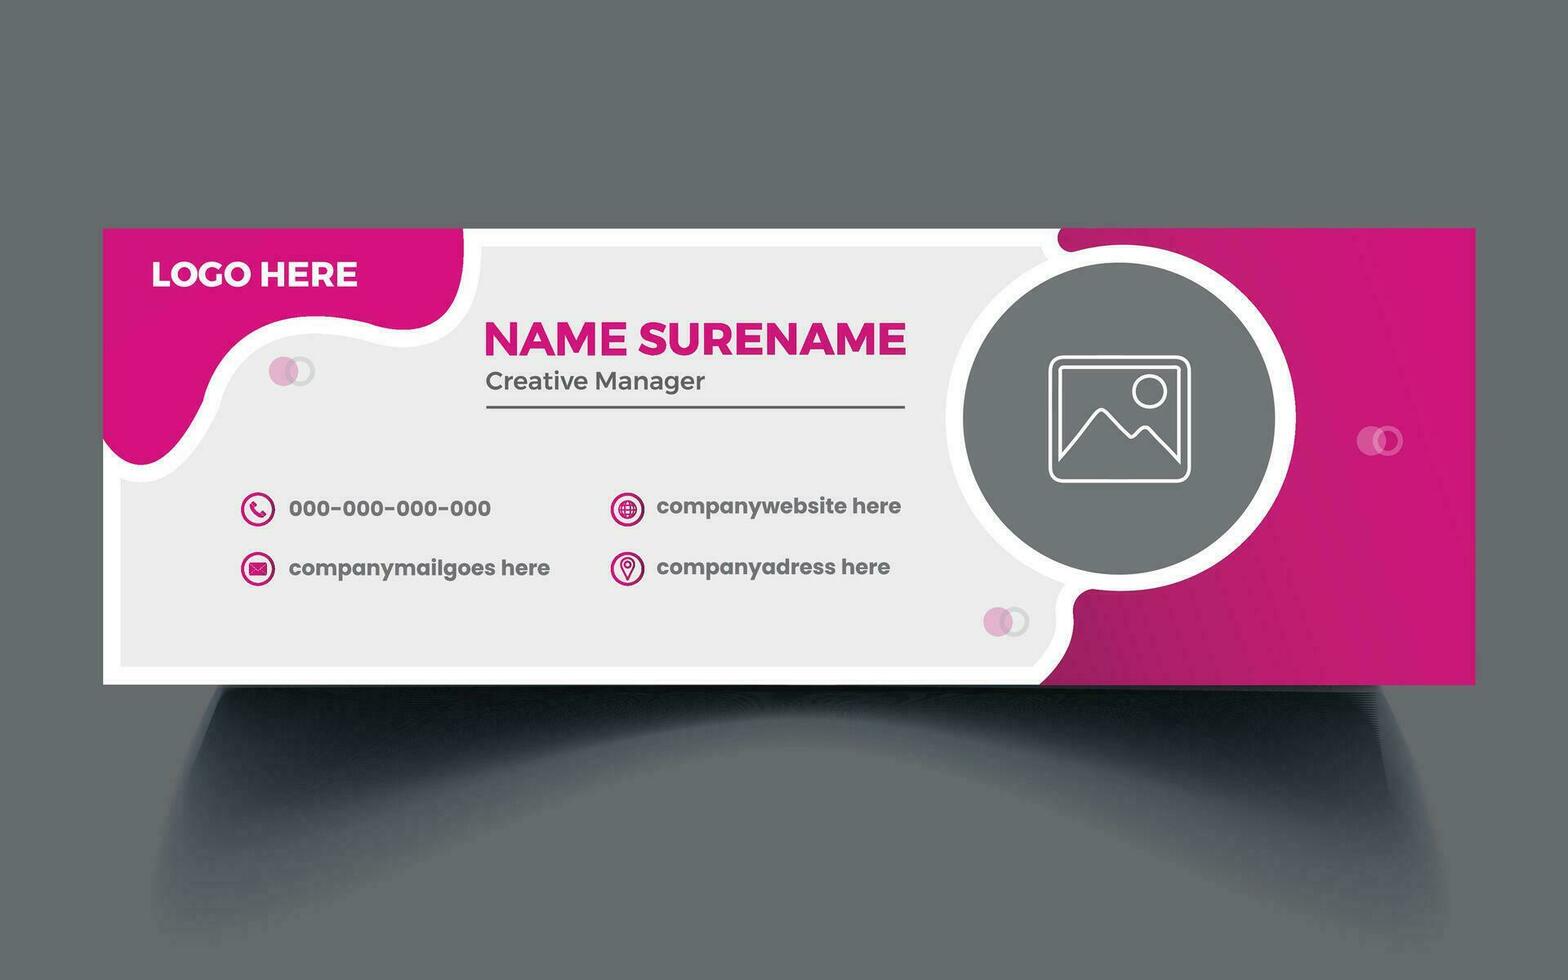 Email Signature or company footer design. Email signature template design Free Vector